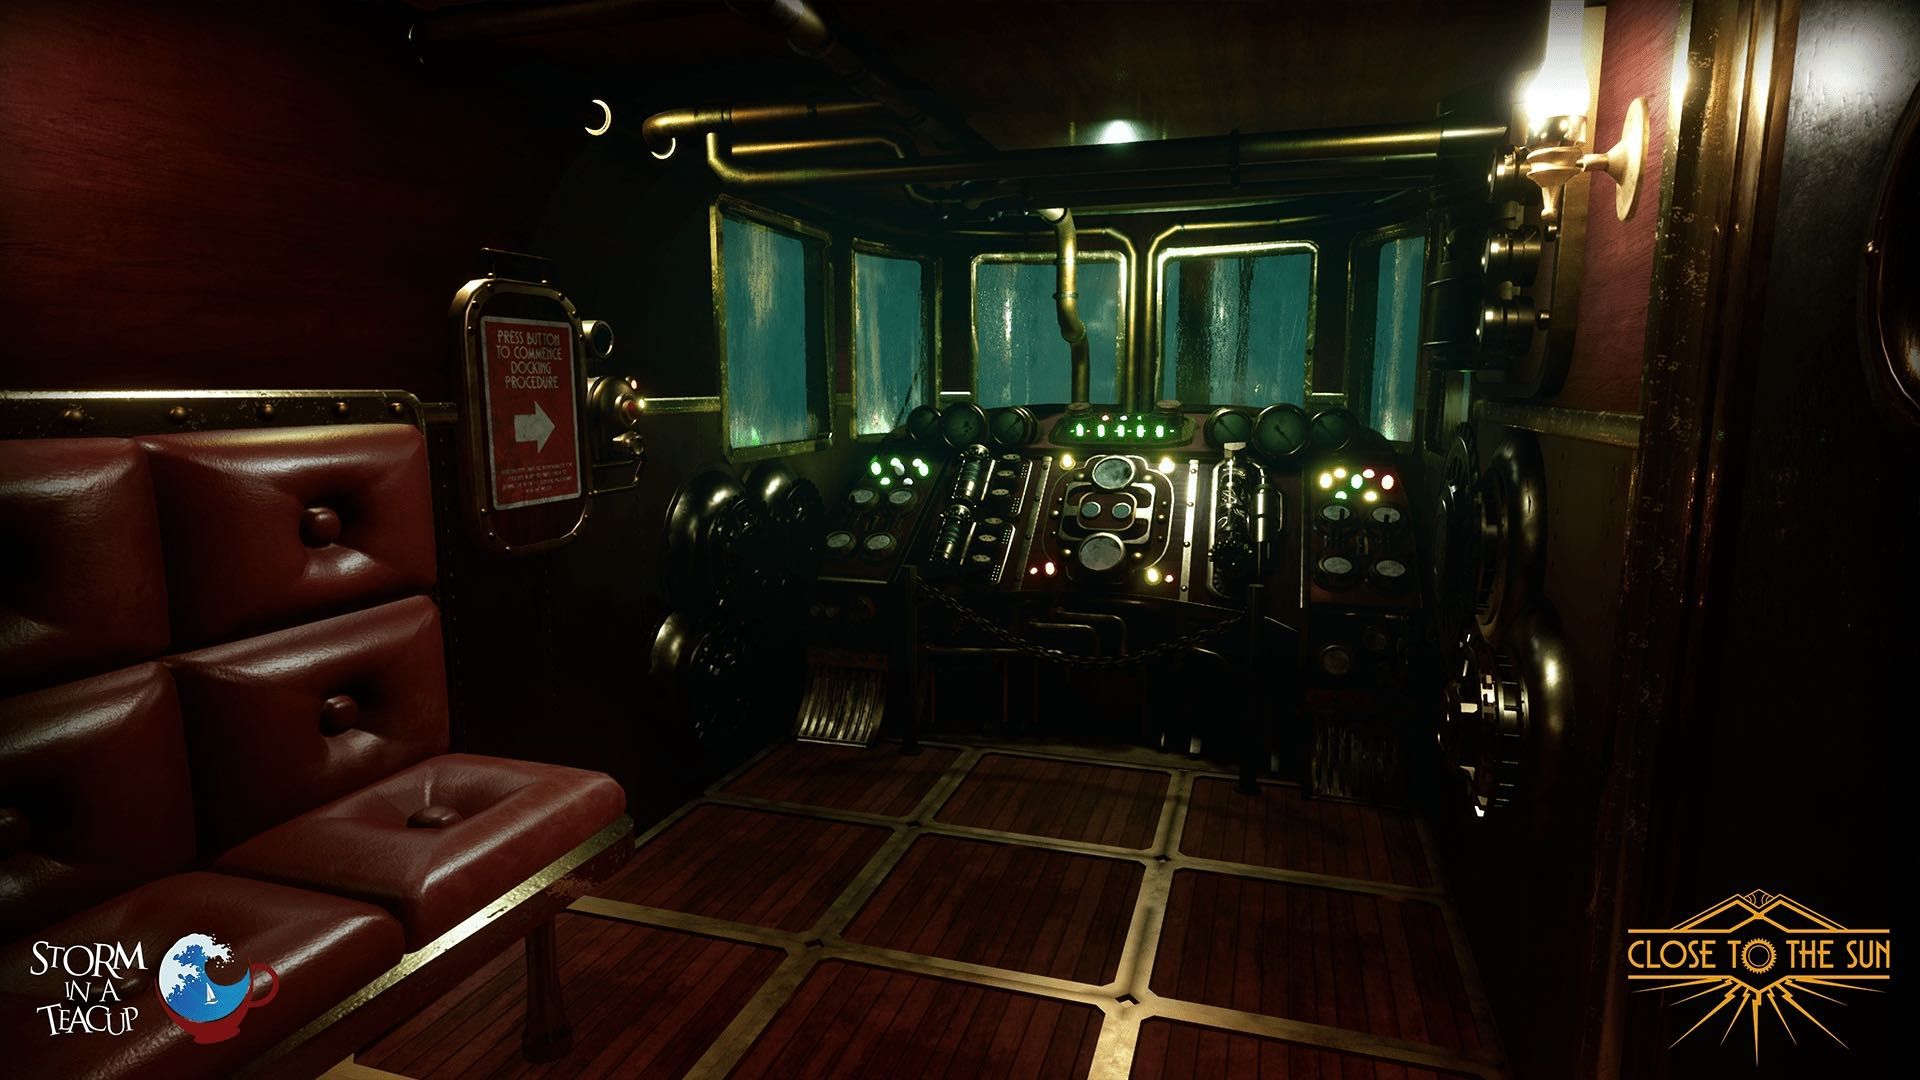 Close to the Sun looks like BioShock mixed with SOMA